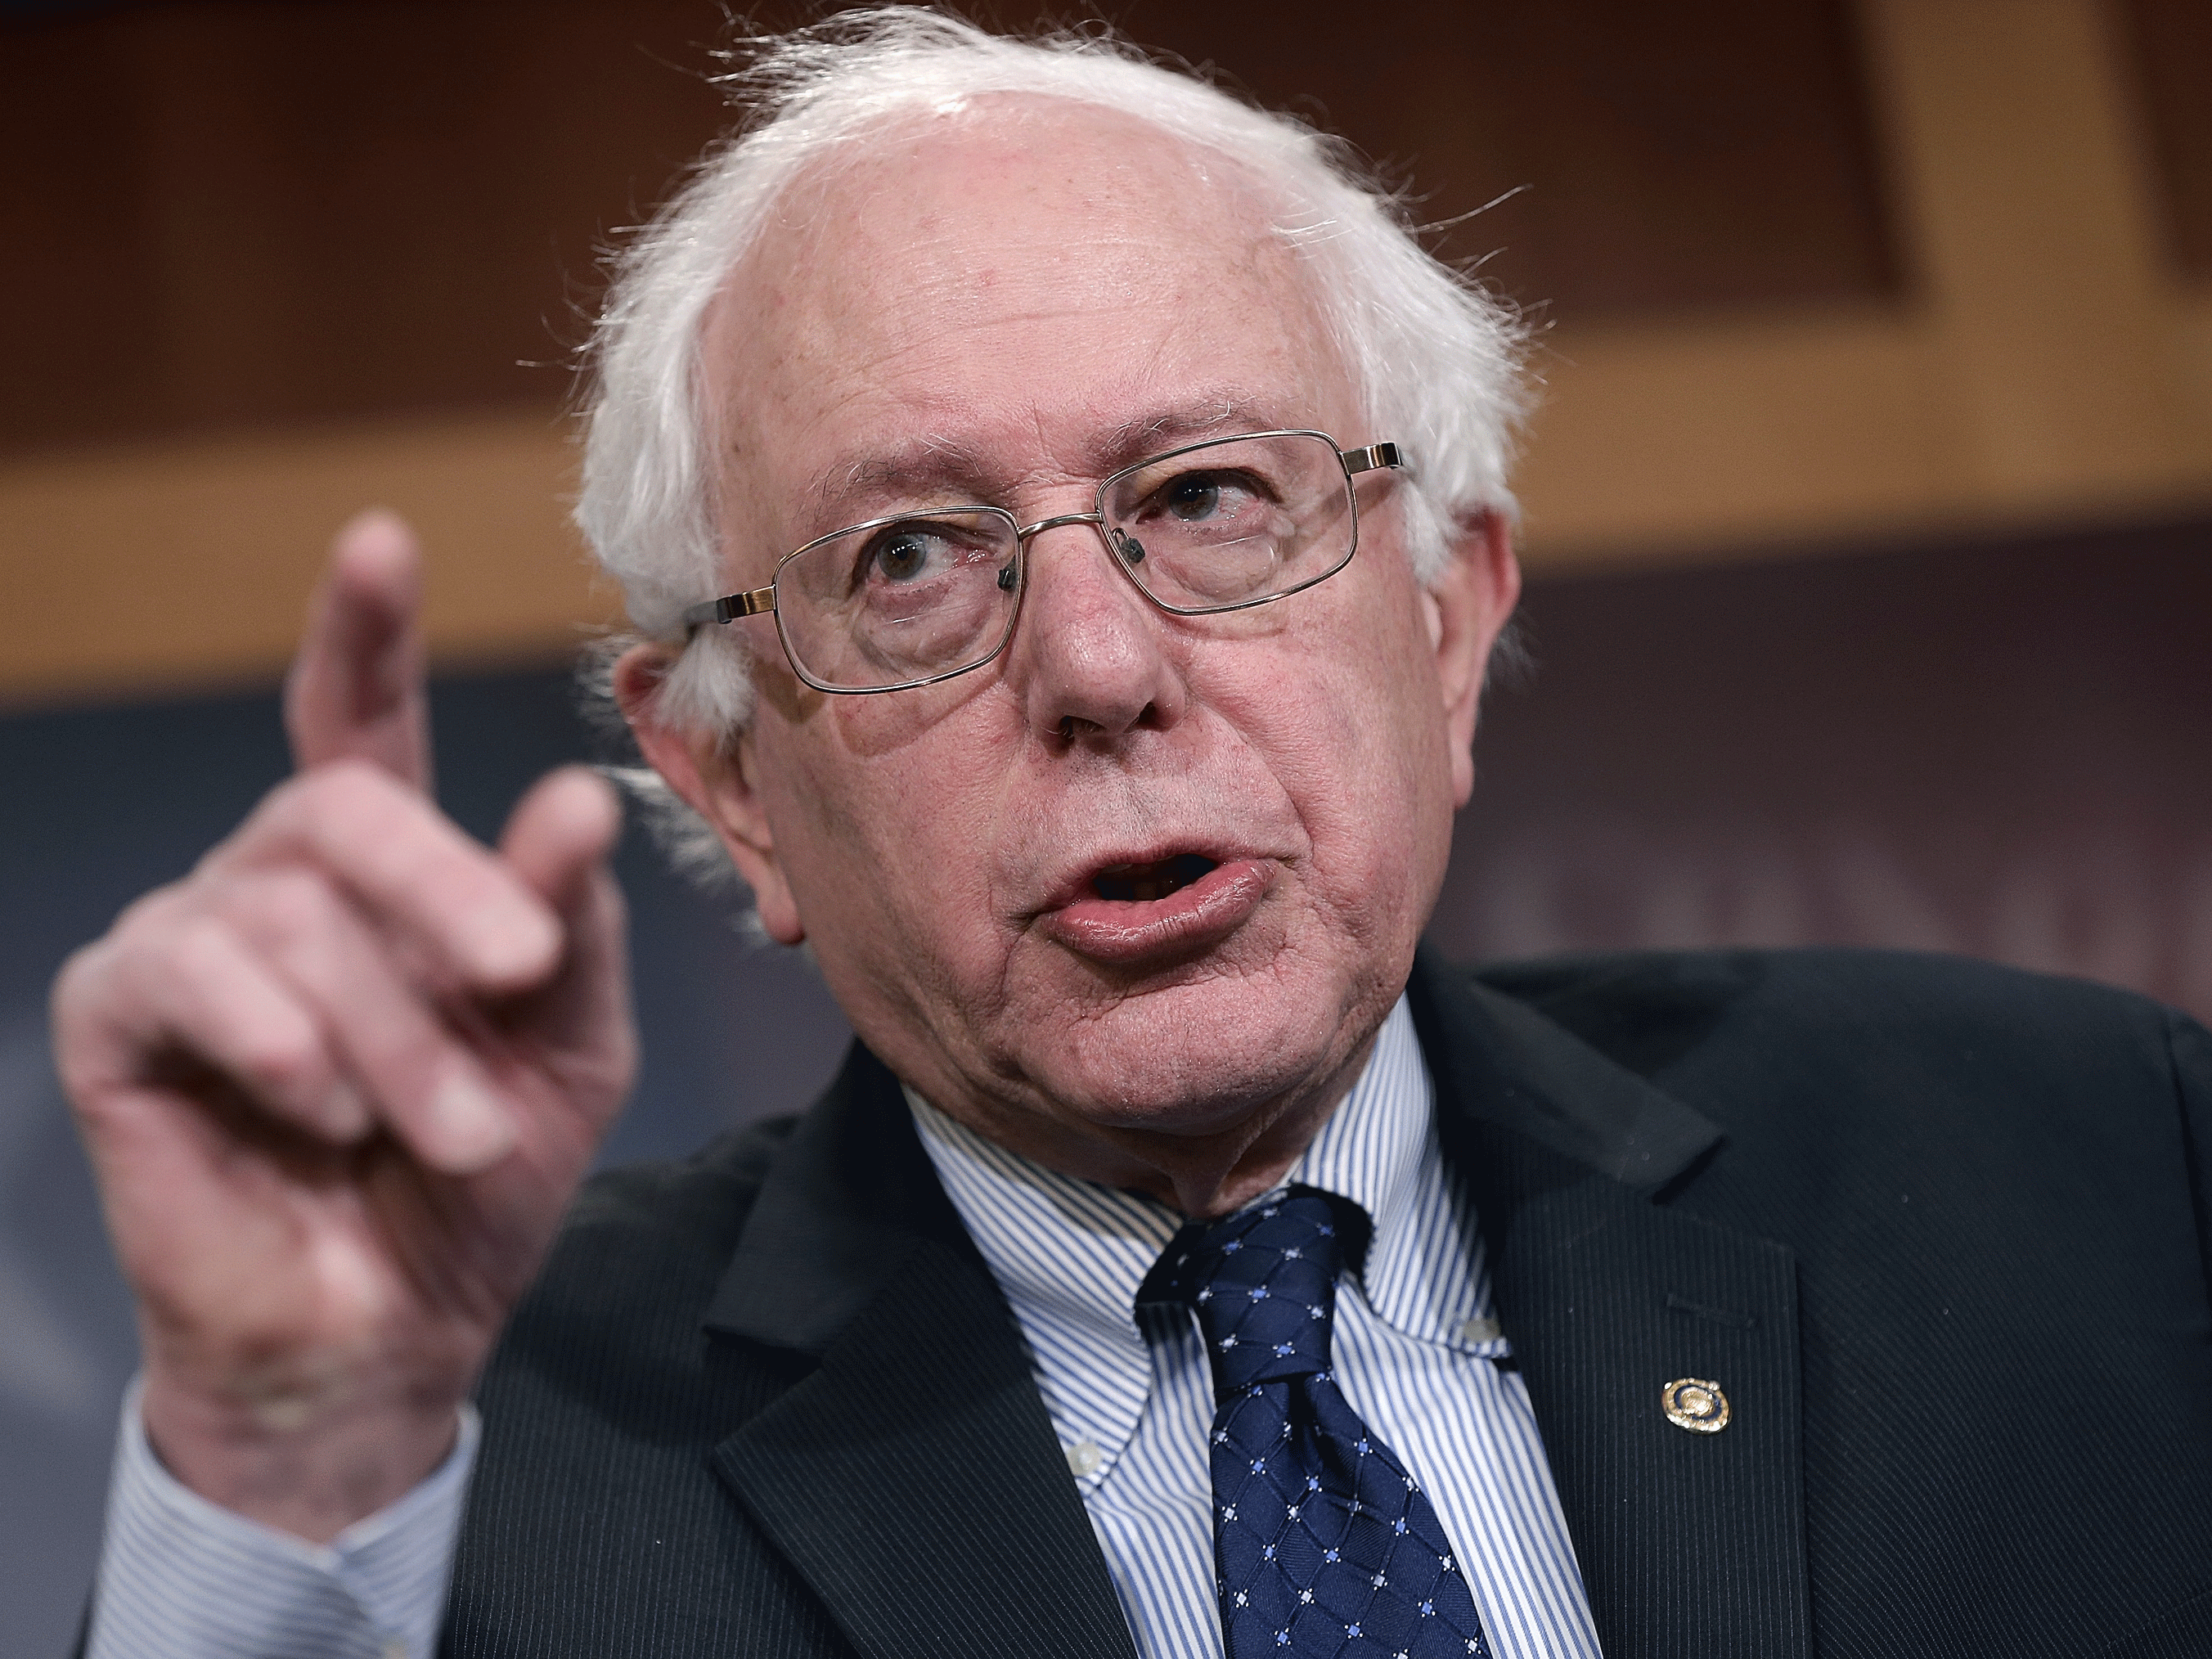 Bernie Sanders is attracting support for his left wing campaign in the U.S.A